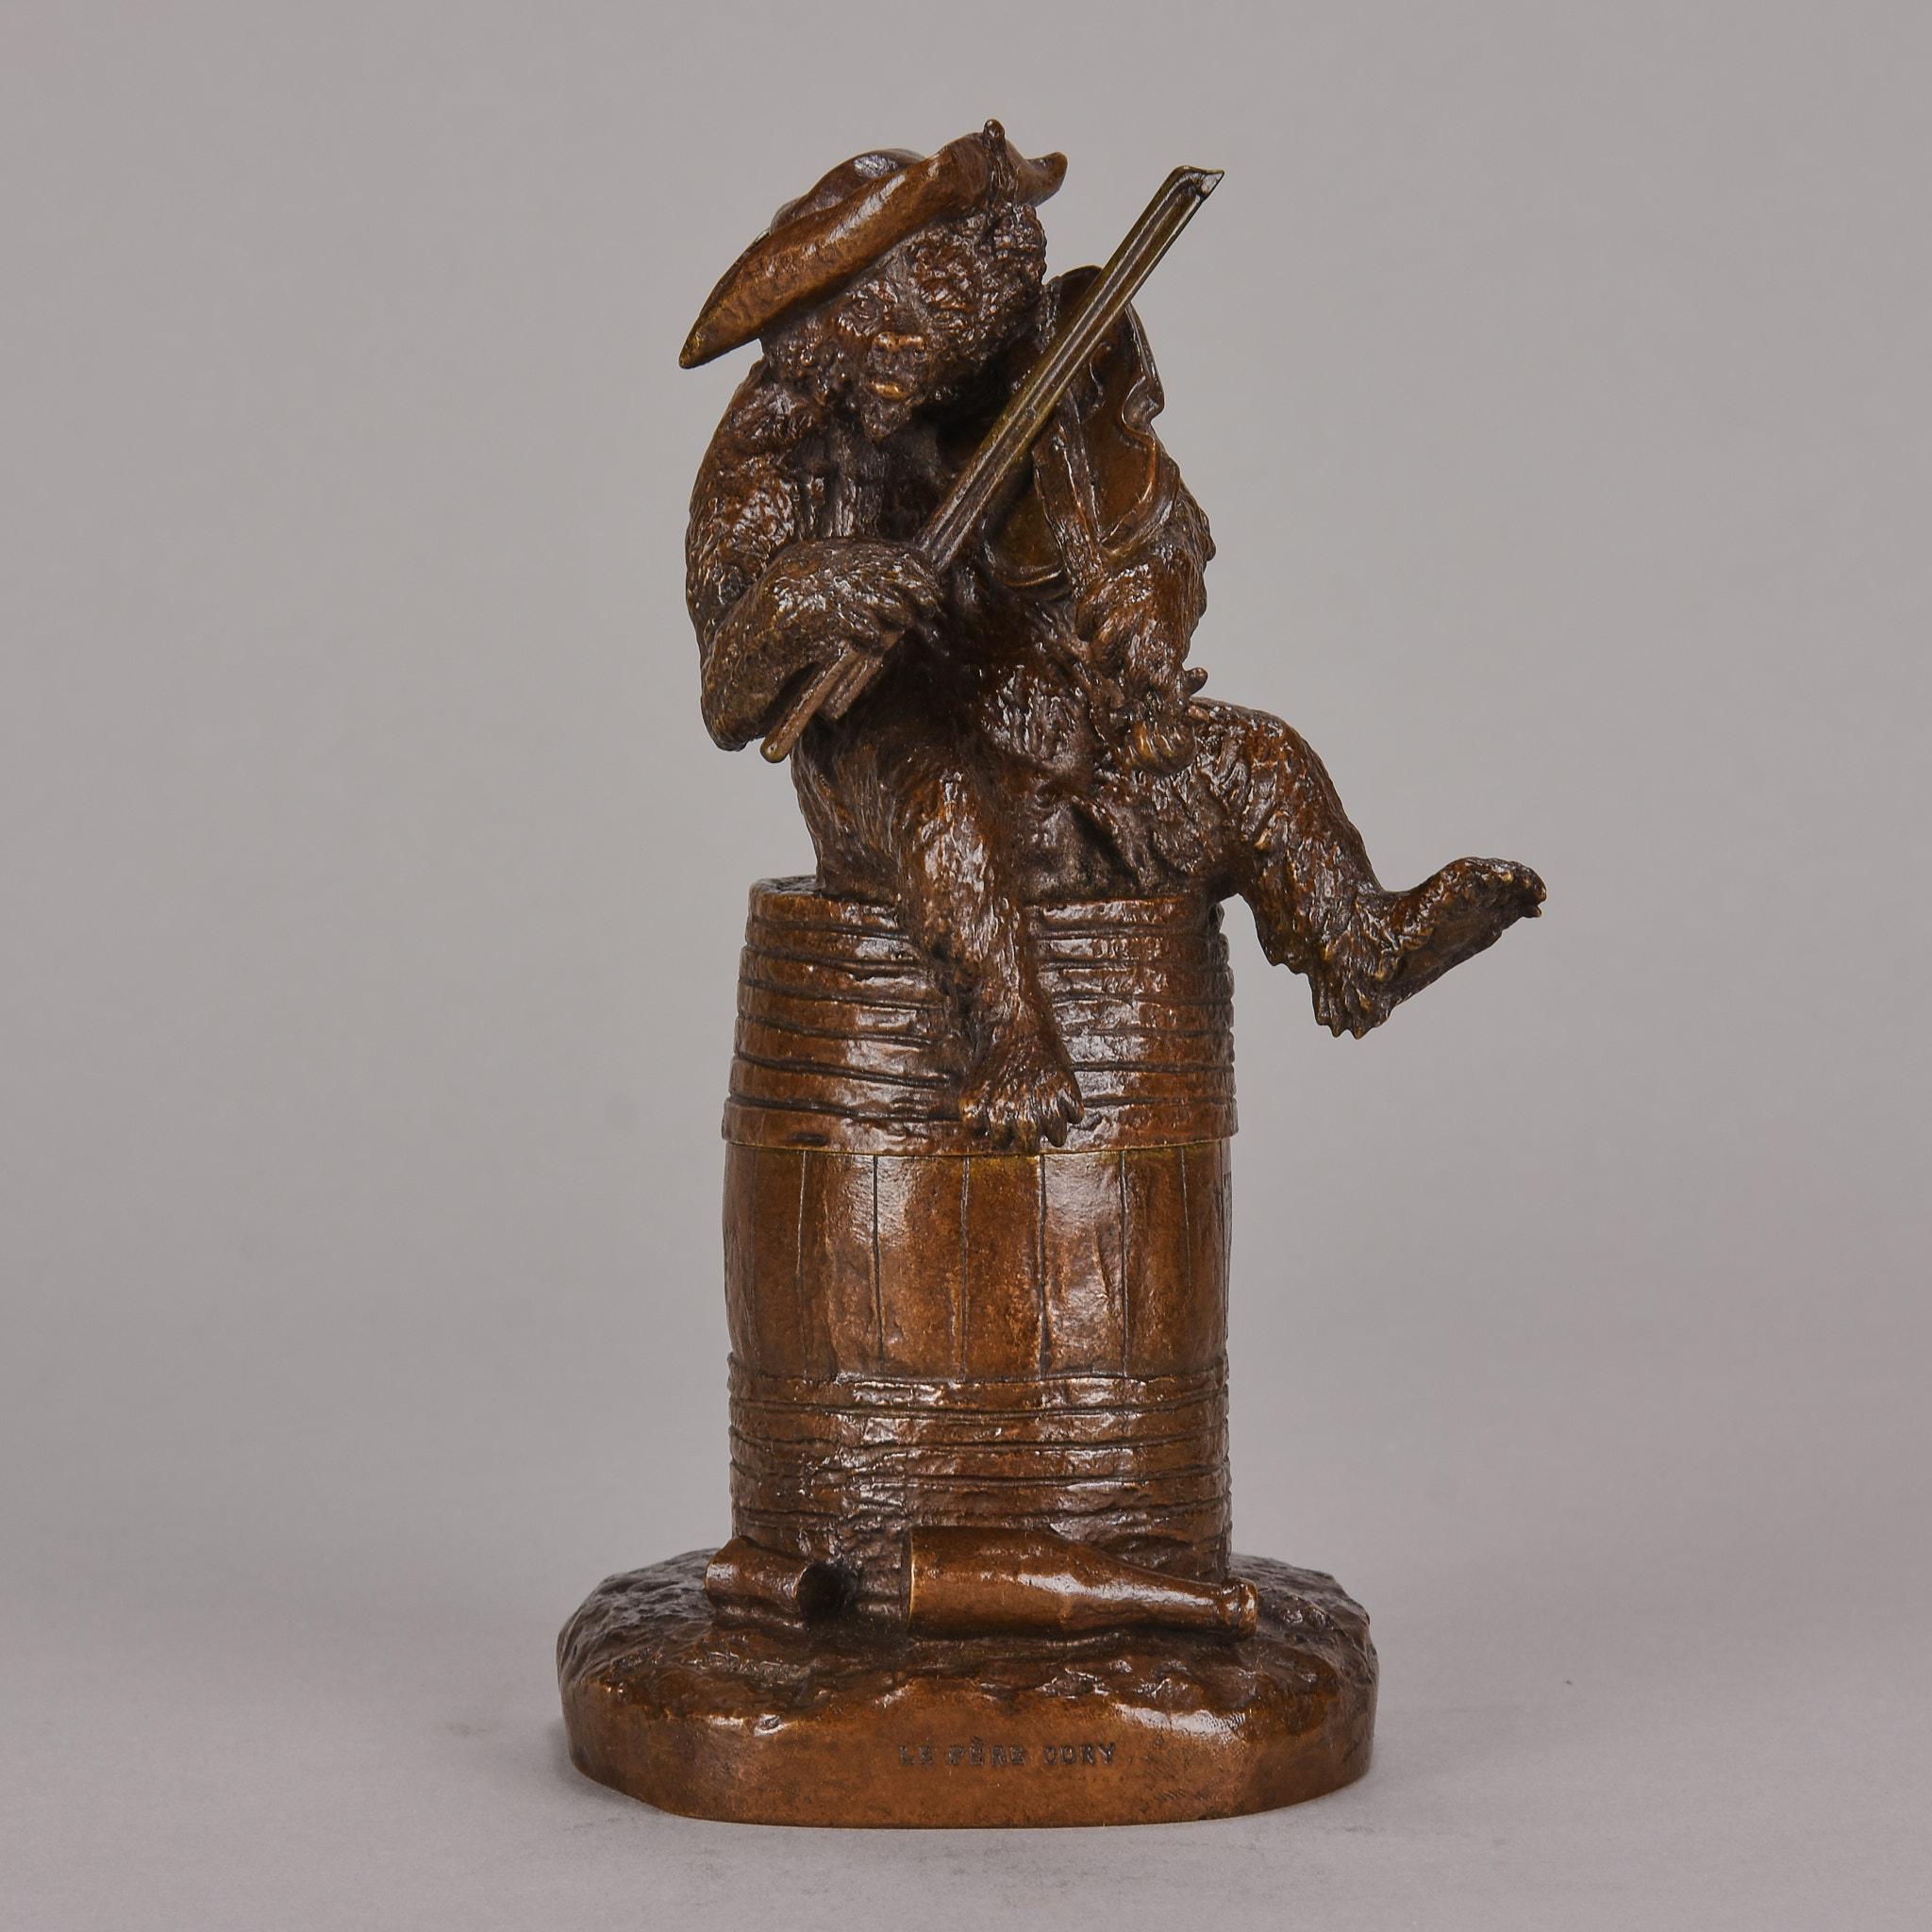 Exquisite mid 19th century French bronze study of an anthropomorphic bear sitting on a barrel playing a violin, the barrel can be opened halfway to form a container. The surface with excellent mid to dark brown patina and very fine hand chased